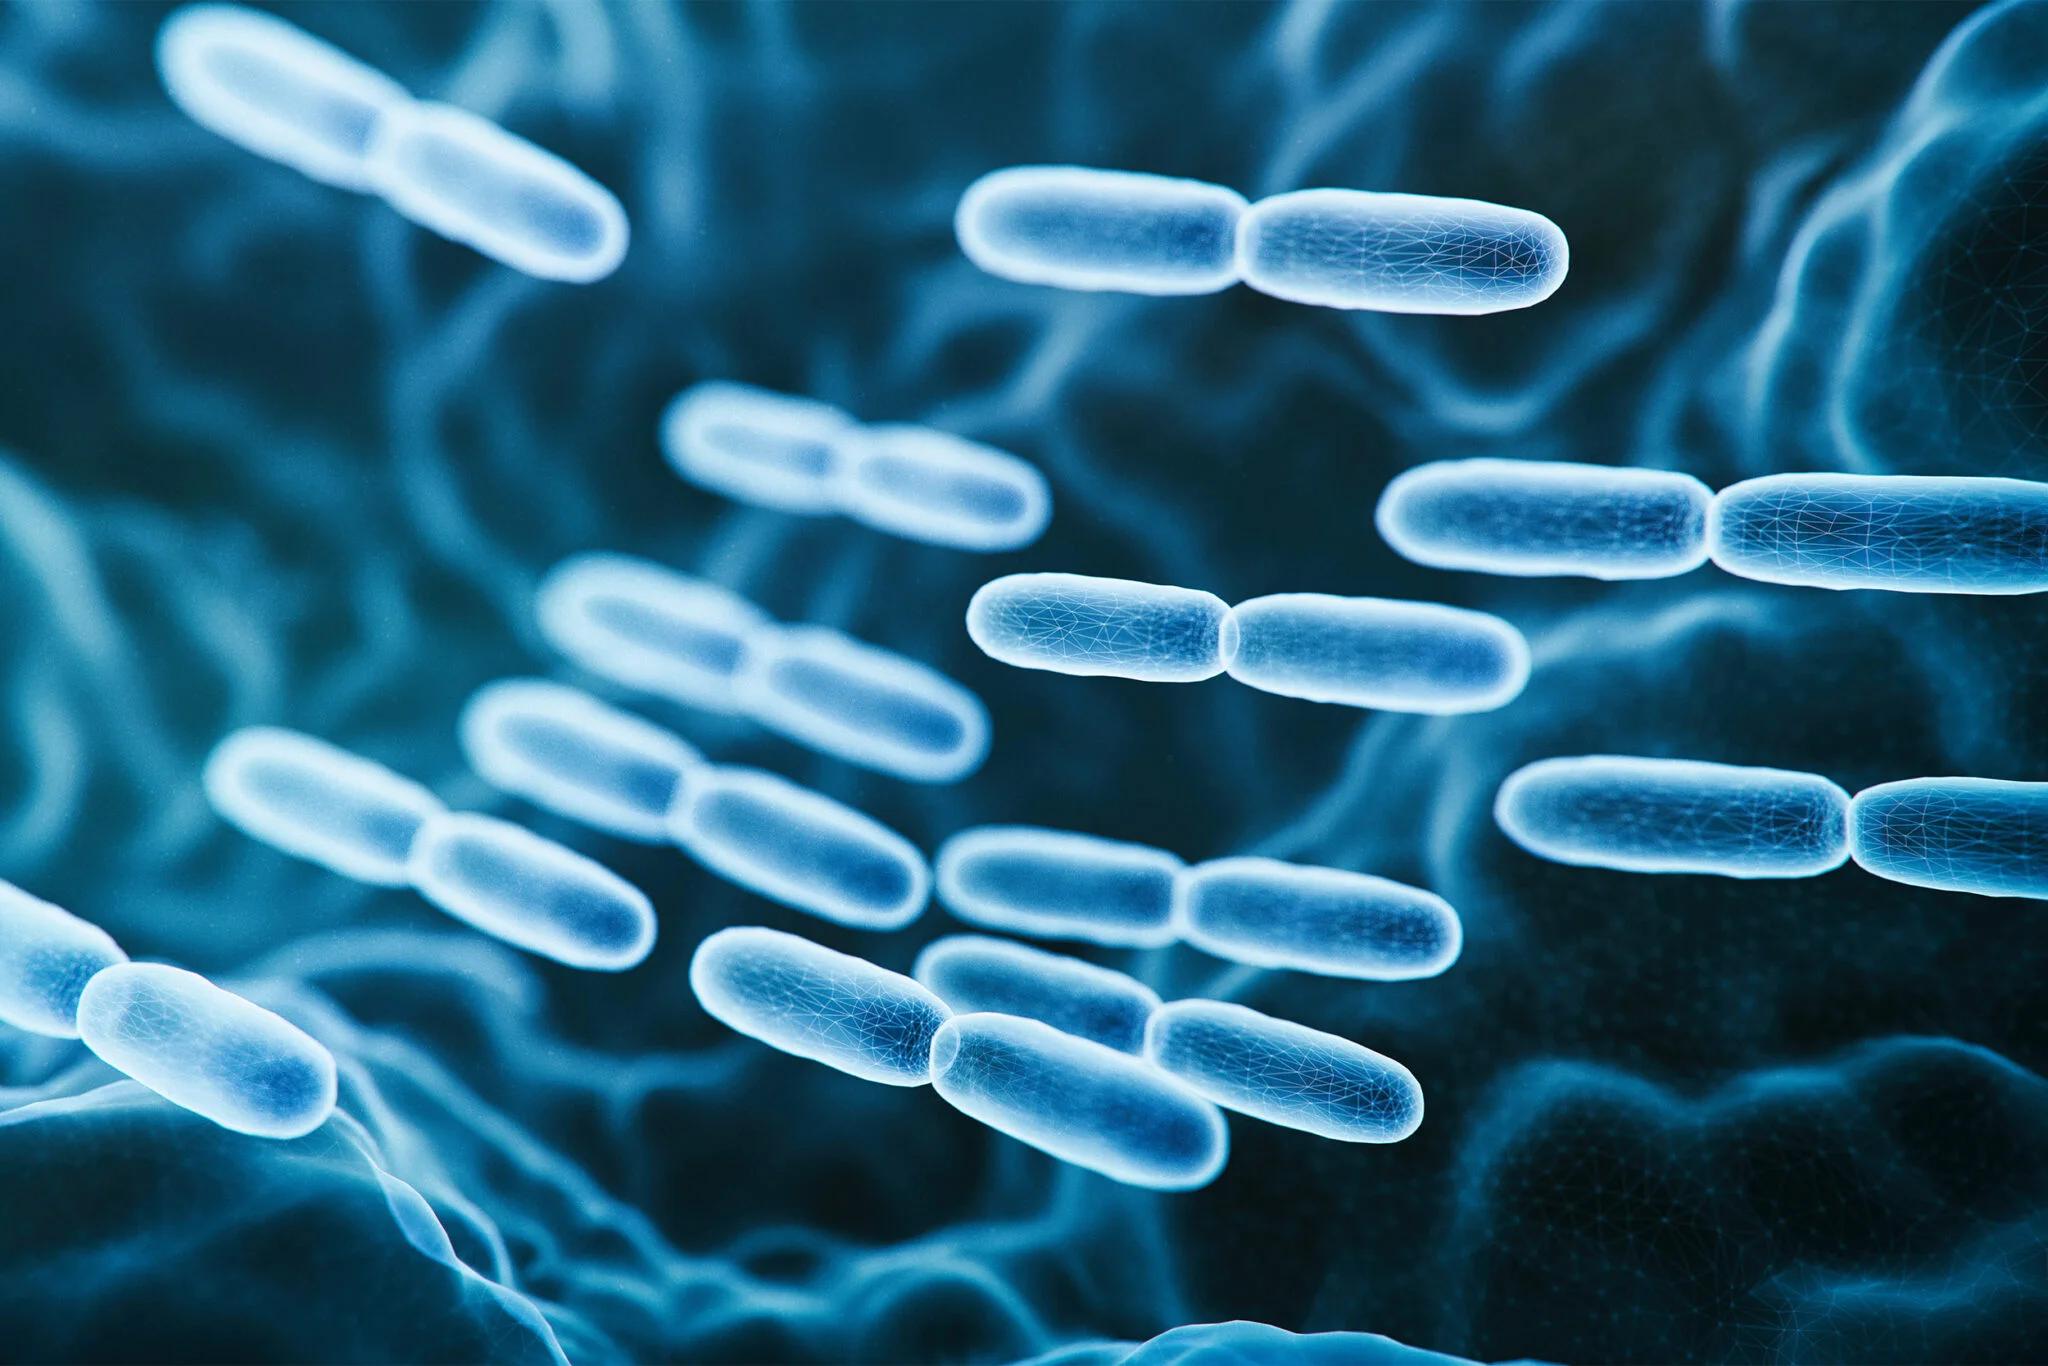 Engineered Probiotic Developed to Treat Multiple Sclerosis